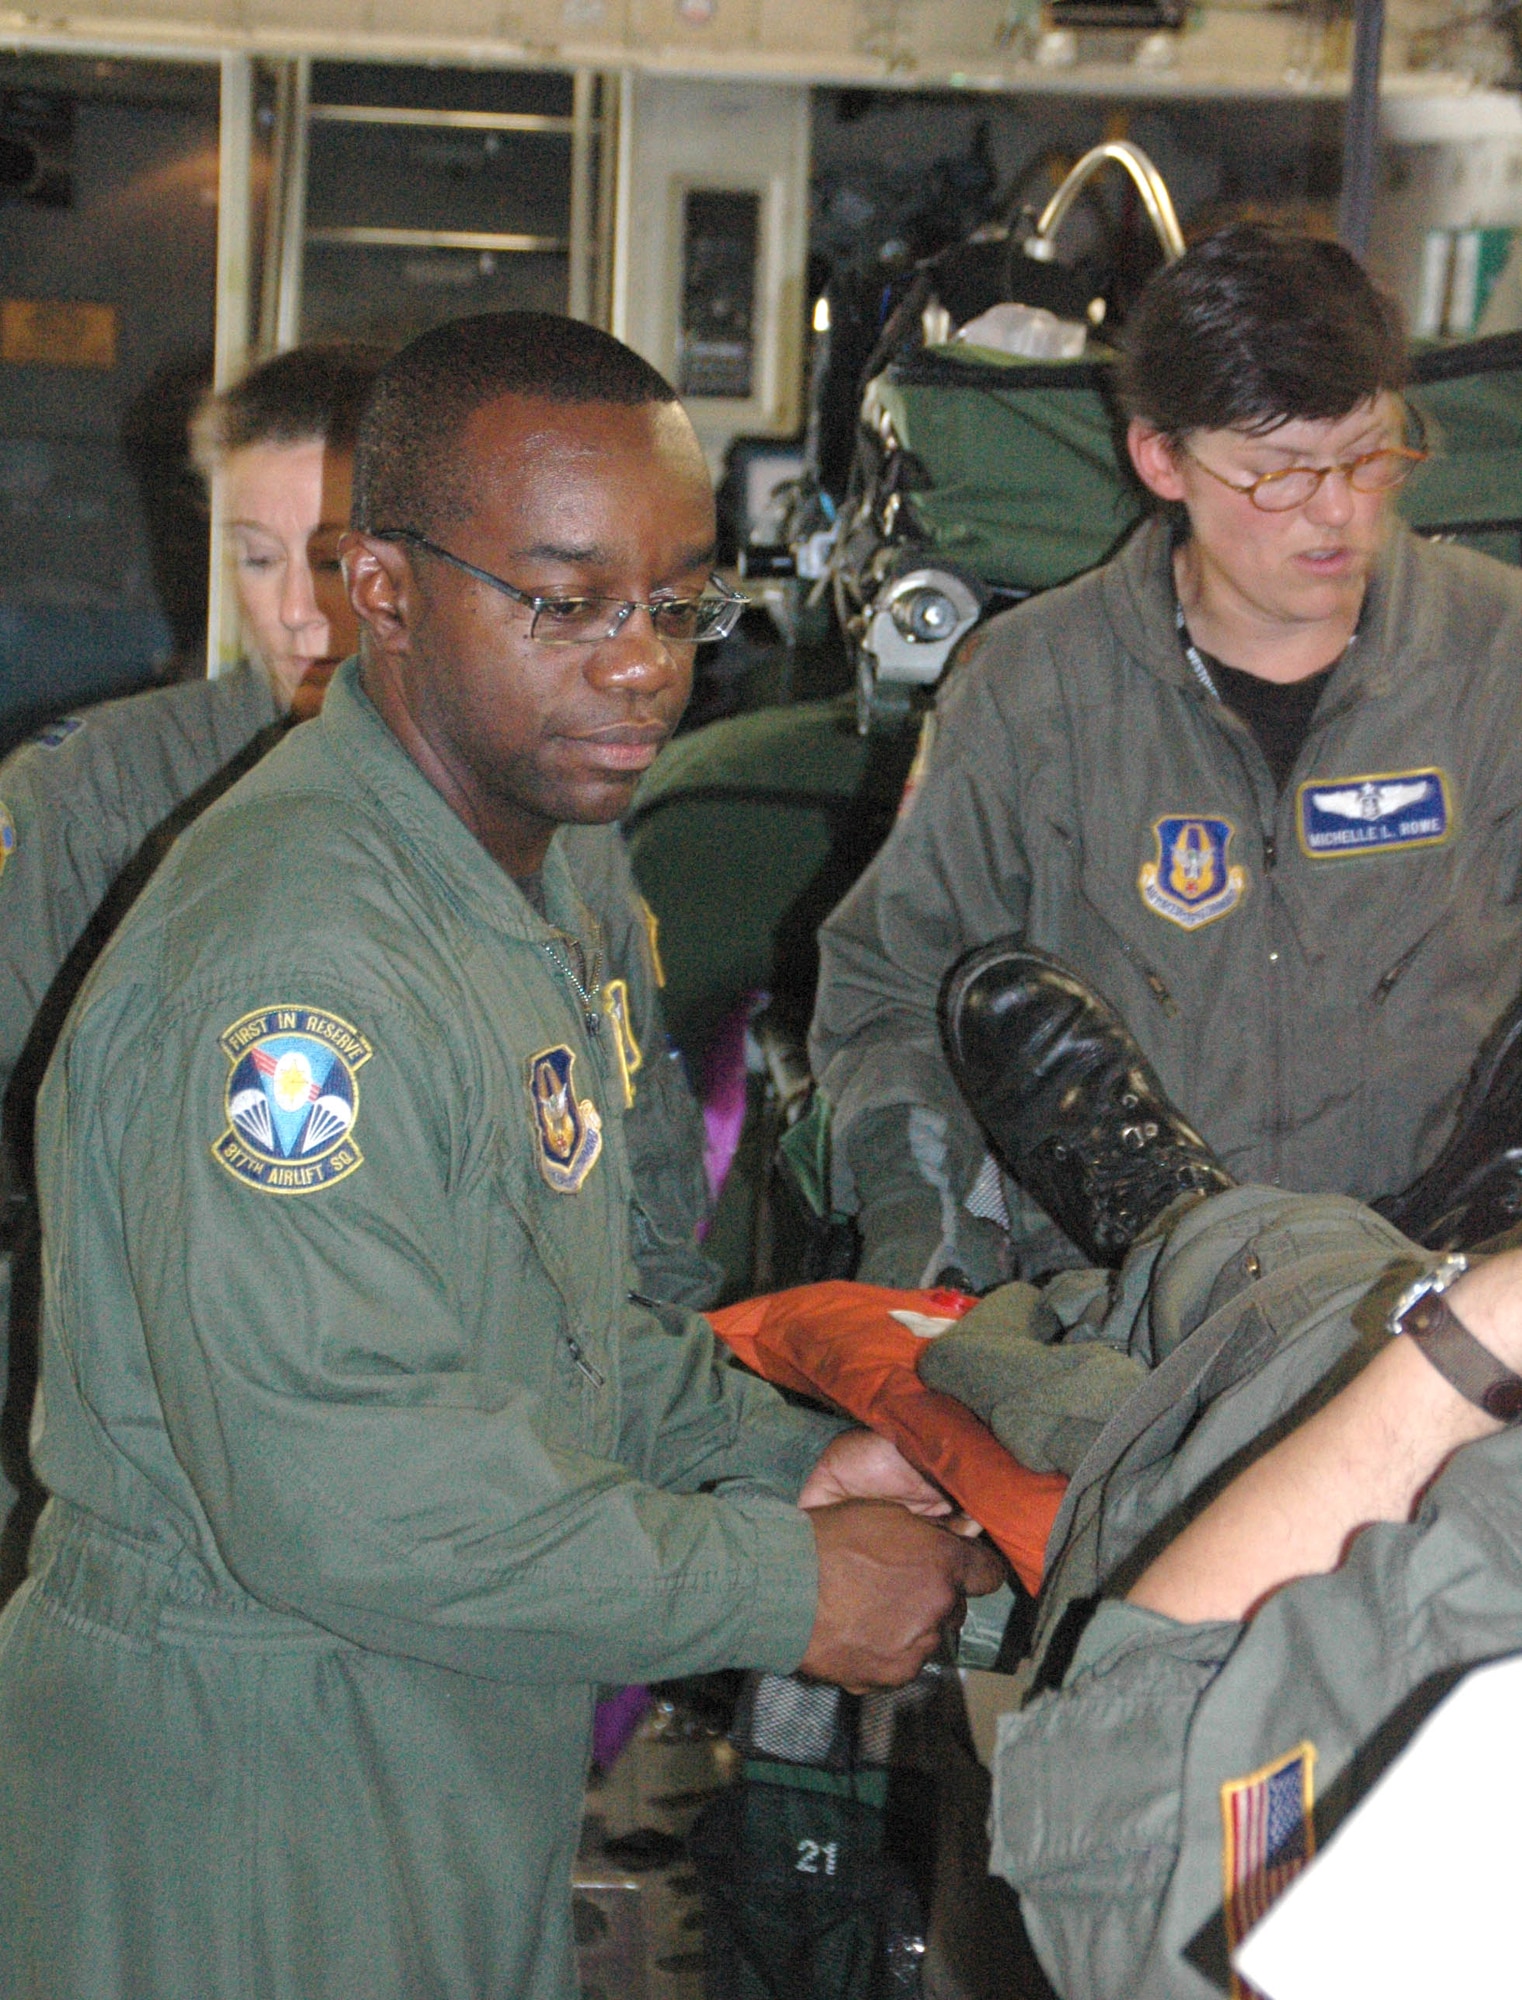 Master Sgt. Reggie Godbolt (left), a loadmaster with the 317th Airlift Squadron, Charleston AFB, S.C., helps Maj. Michelle Rowe, flight nurse with the 439th Aeromedical Evacuation Squadron, Westover ARB, Mass., secure a simulated patient on a joint C-17 training mission.  (Air Force photo/Capt. Wayne Capps)